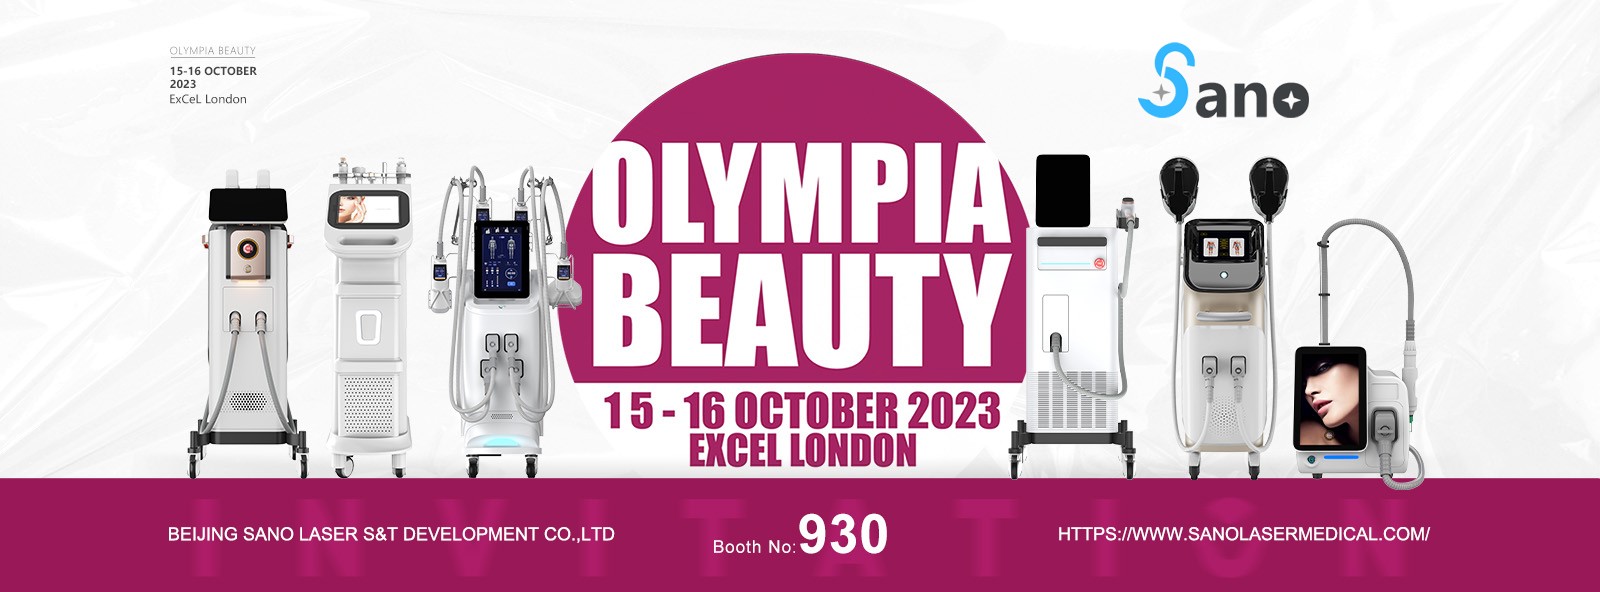 BEIJINGSANO Will At LONDON Olympia Beauty 2023! Come And Find Us At 928/3!